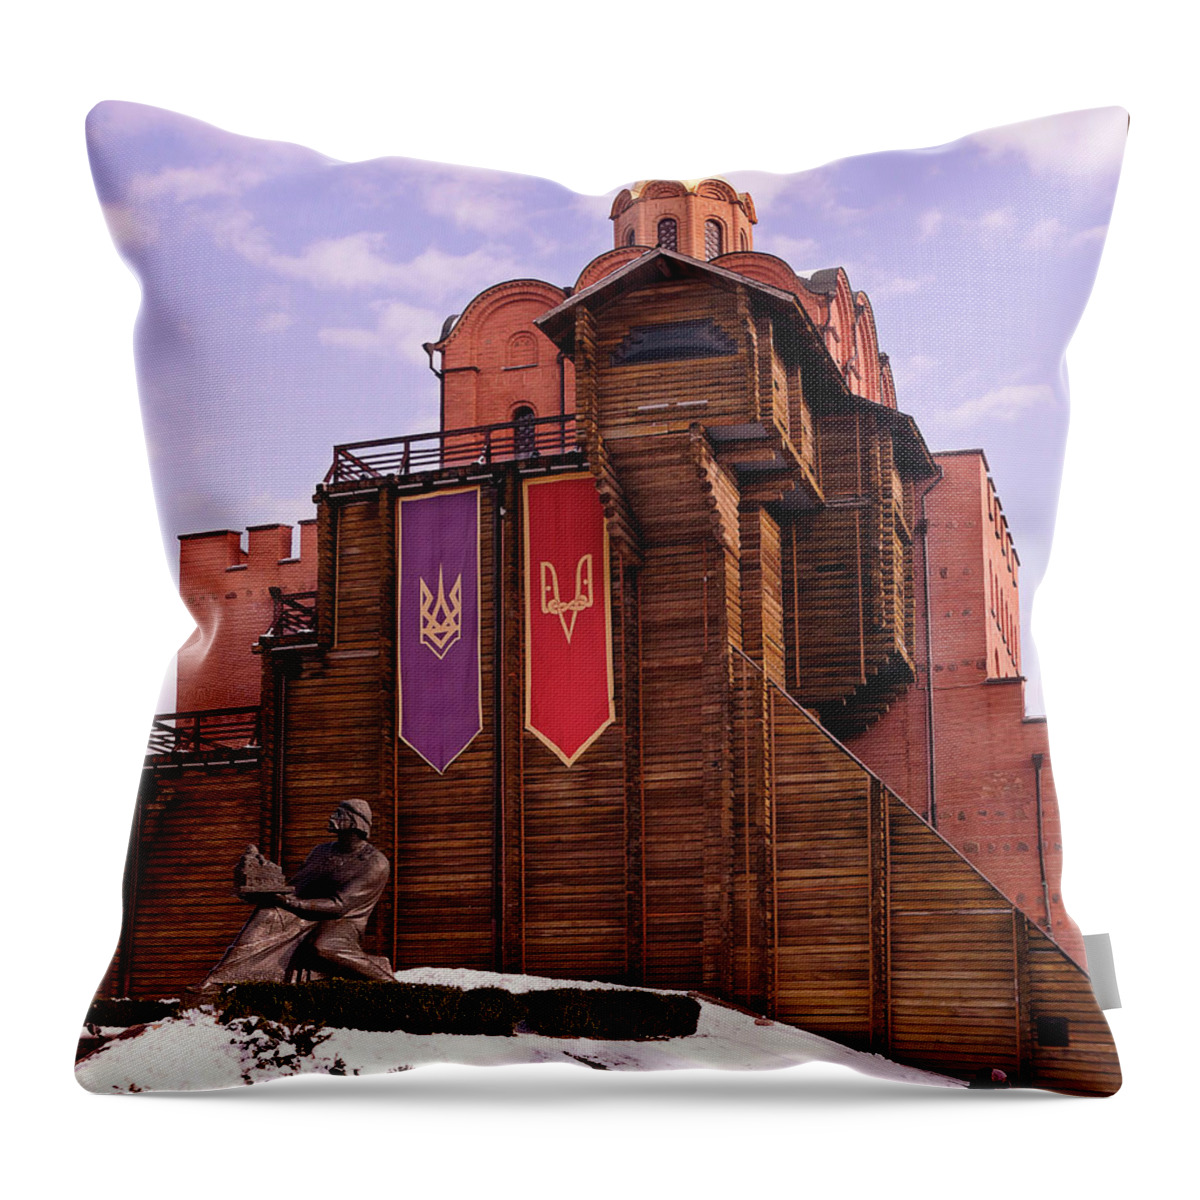 Kiev Throw Pillow featuring the photograph Banners of the Gate by Sean Henderson